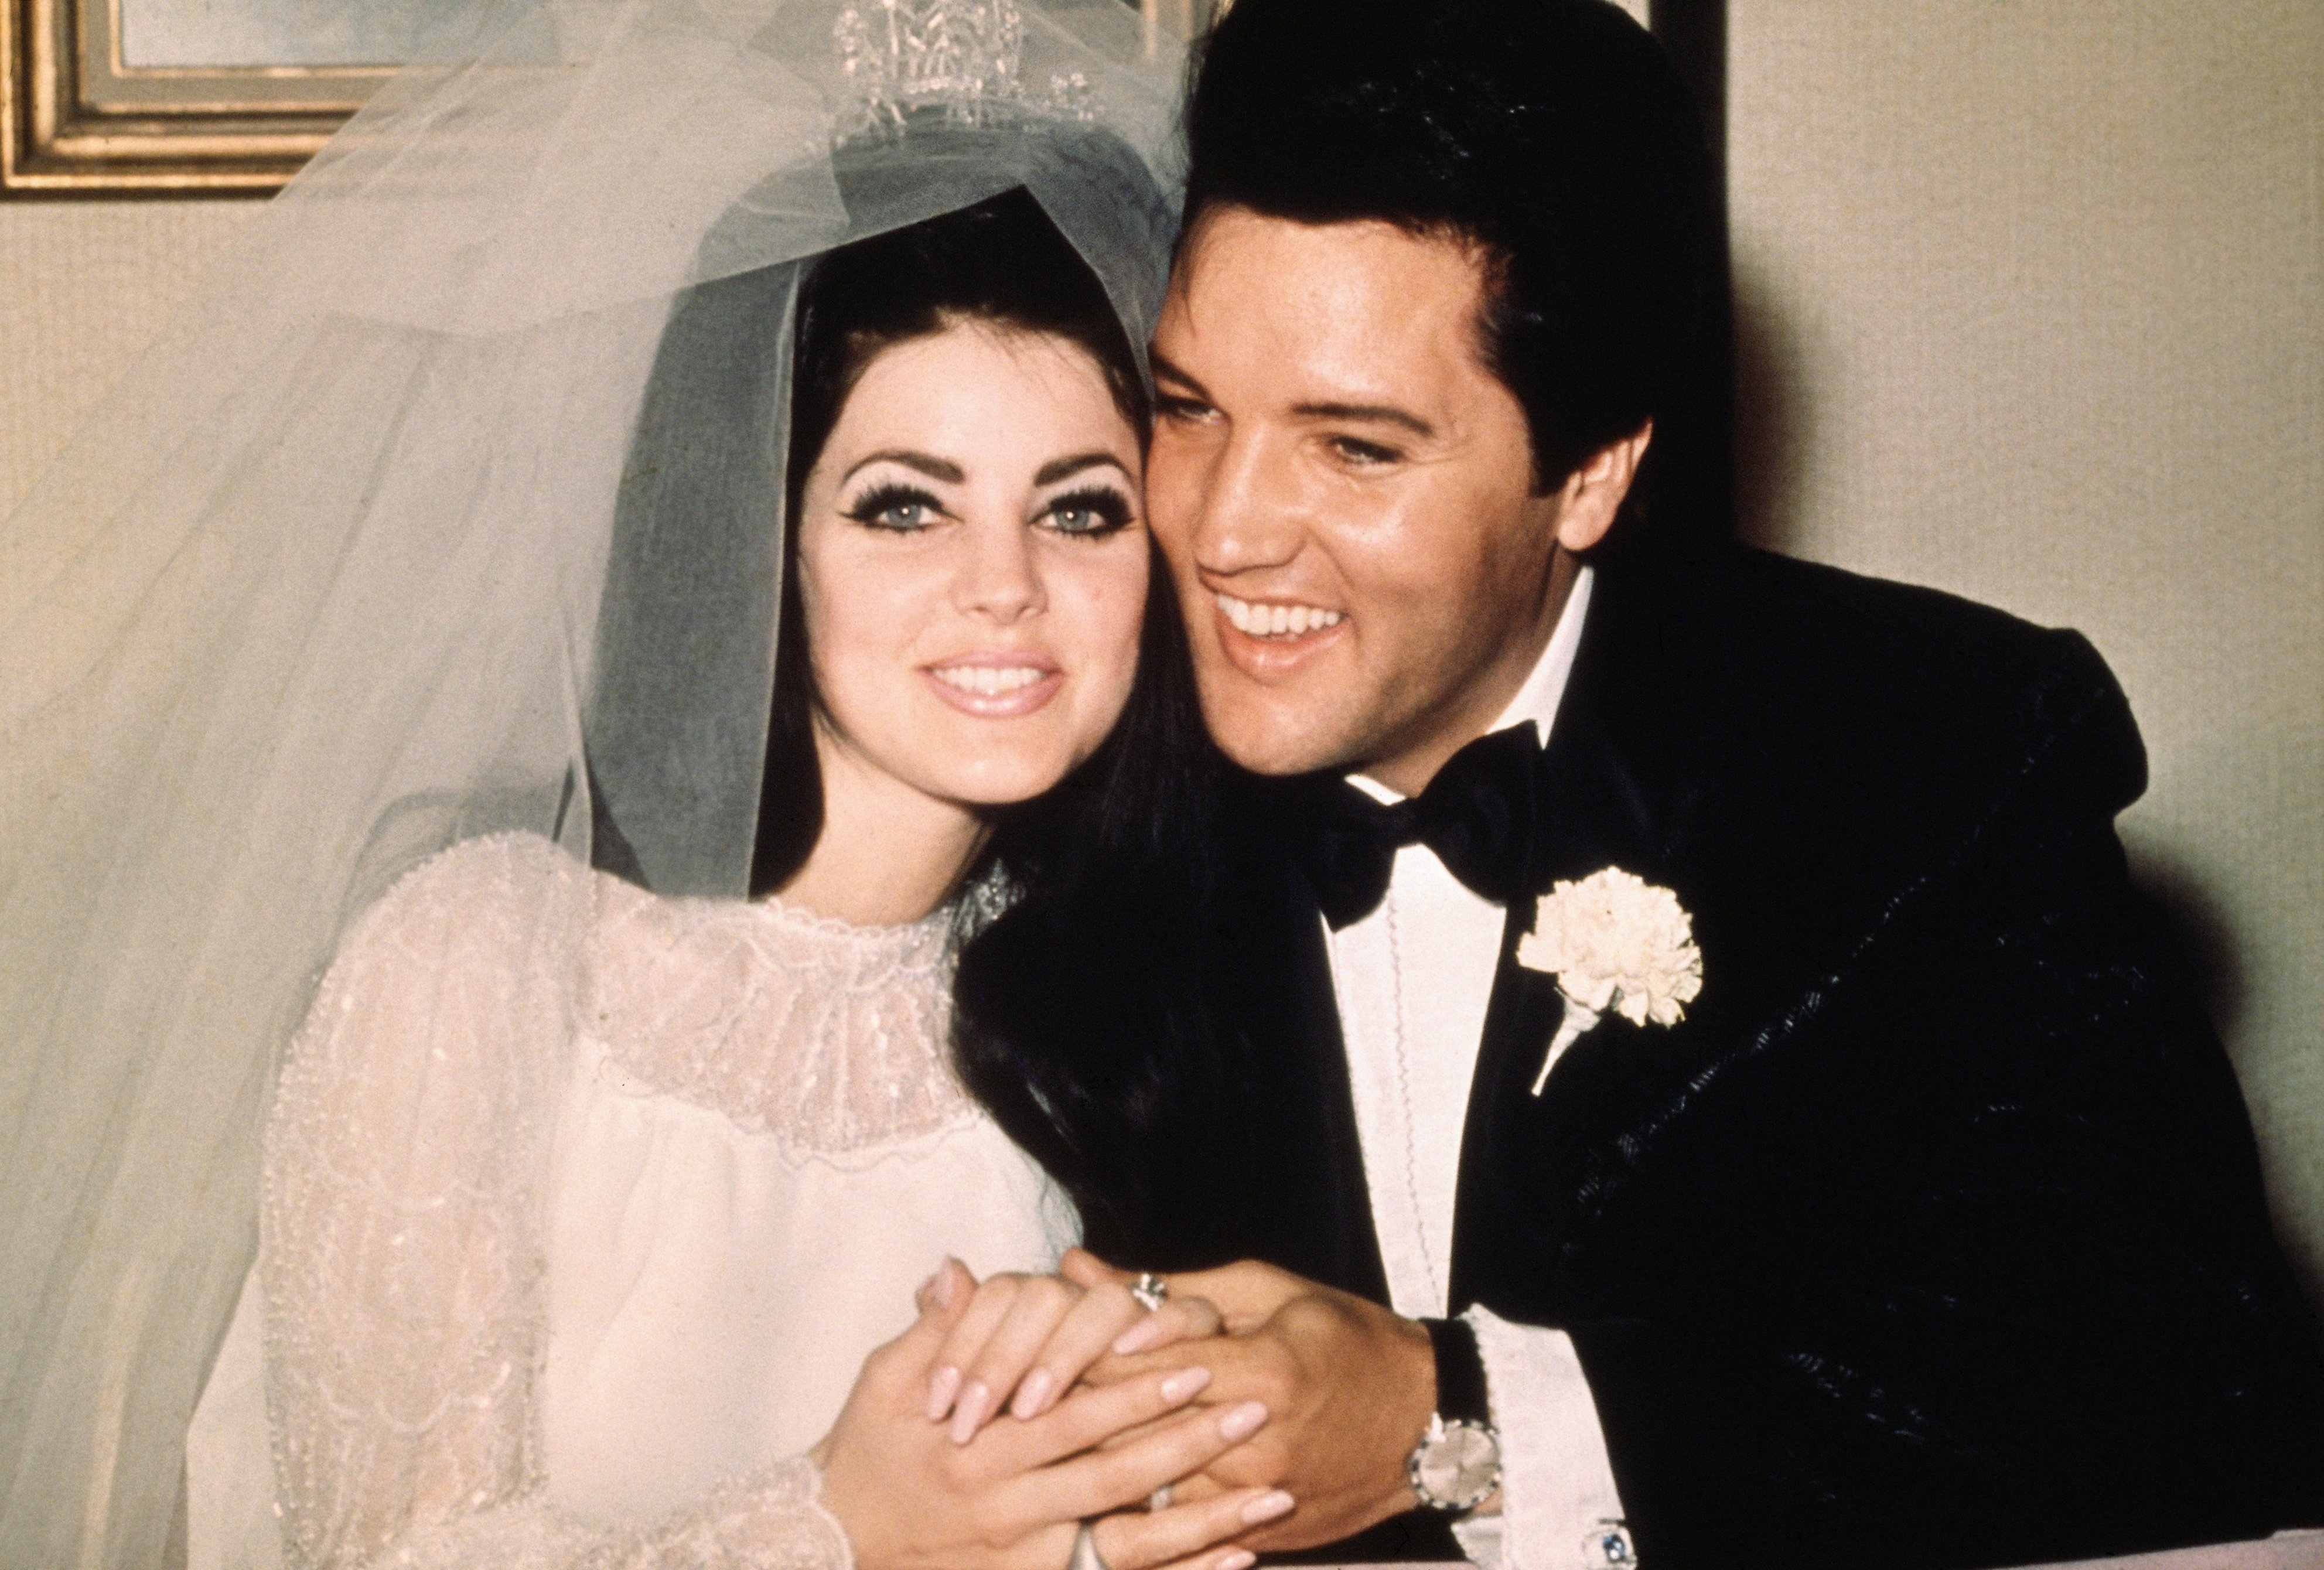 Elvis Presley and Priscilla Ann Beaulieu on their wedding day on May 1, 1967 | Source: Getty Images